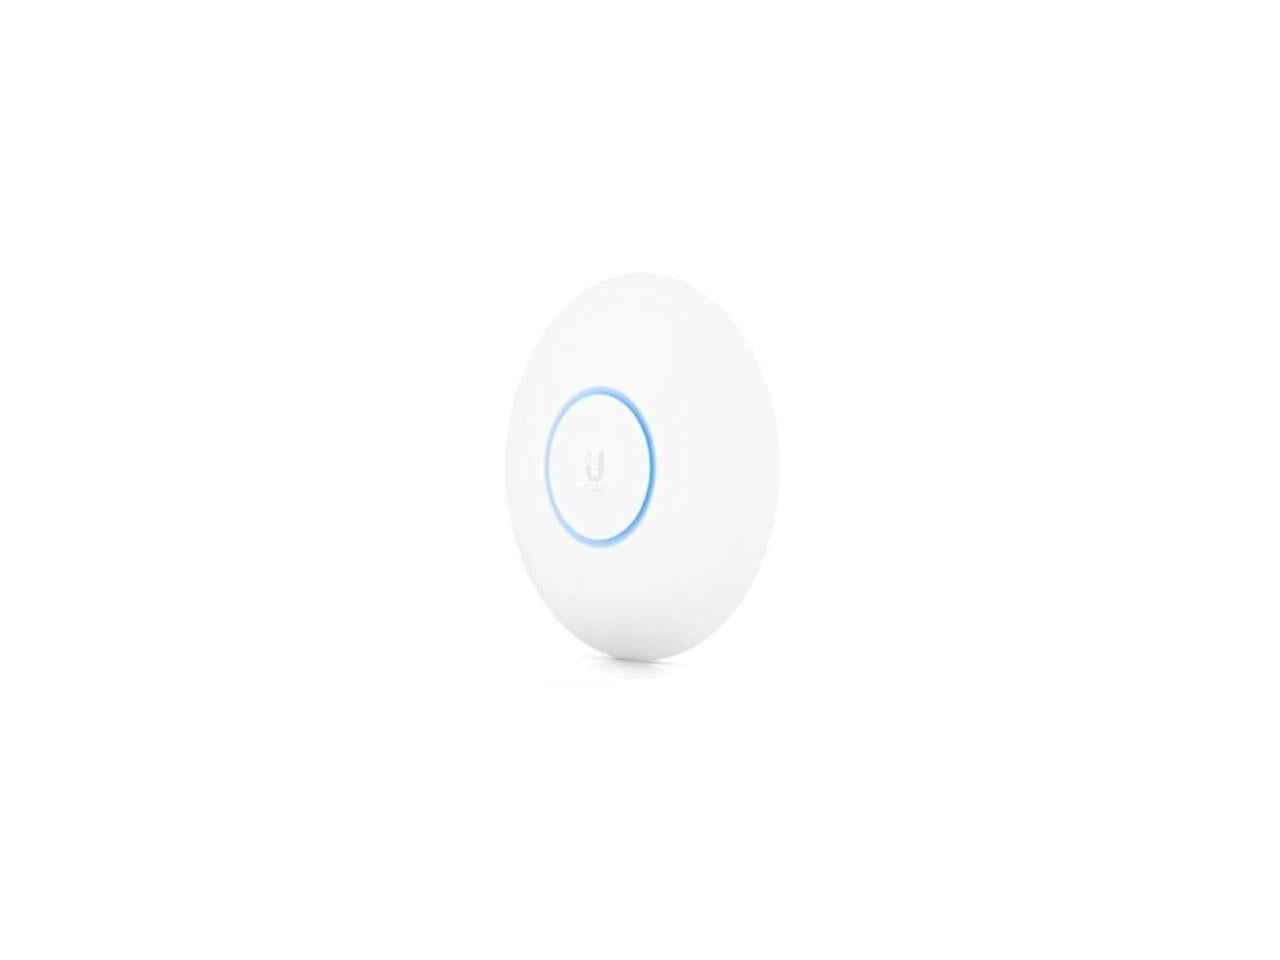 U6 2.4 Gbps, | WiFi Throughput GHz Point Steel SGCC to Rate WiFi Dual 300 UniFi 573.5 White Professional Ubiquiti 5GHz 4.8 Band Pro Up Access | Band Indoor Band | 6 | | Client | Mbps Plastic, Gen